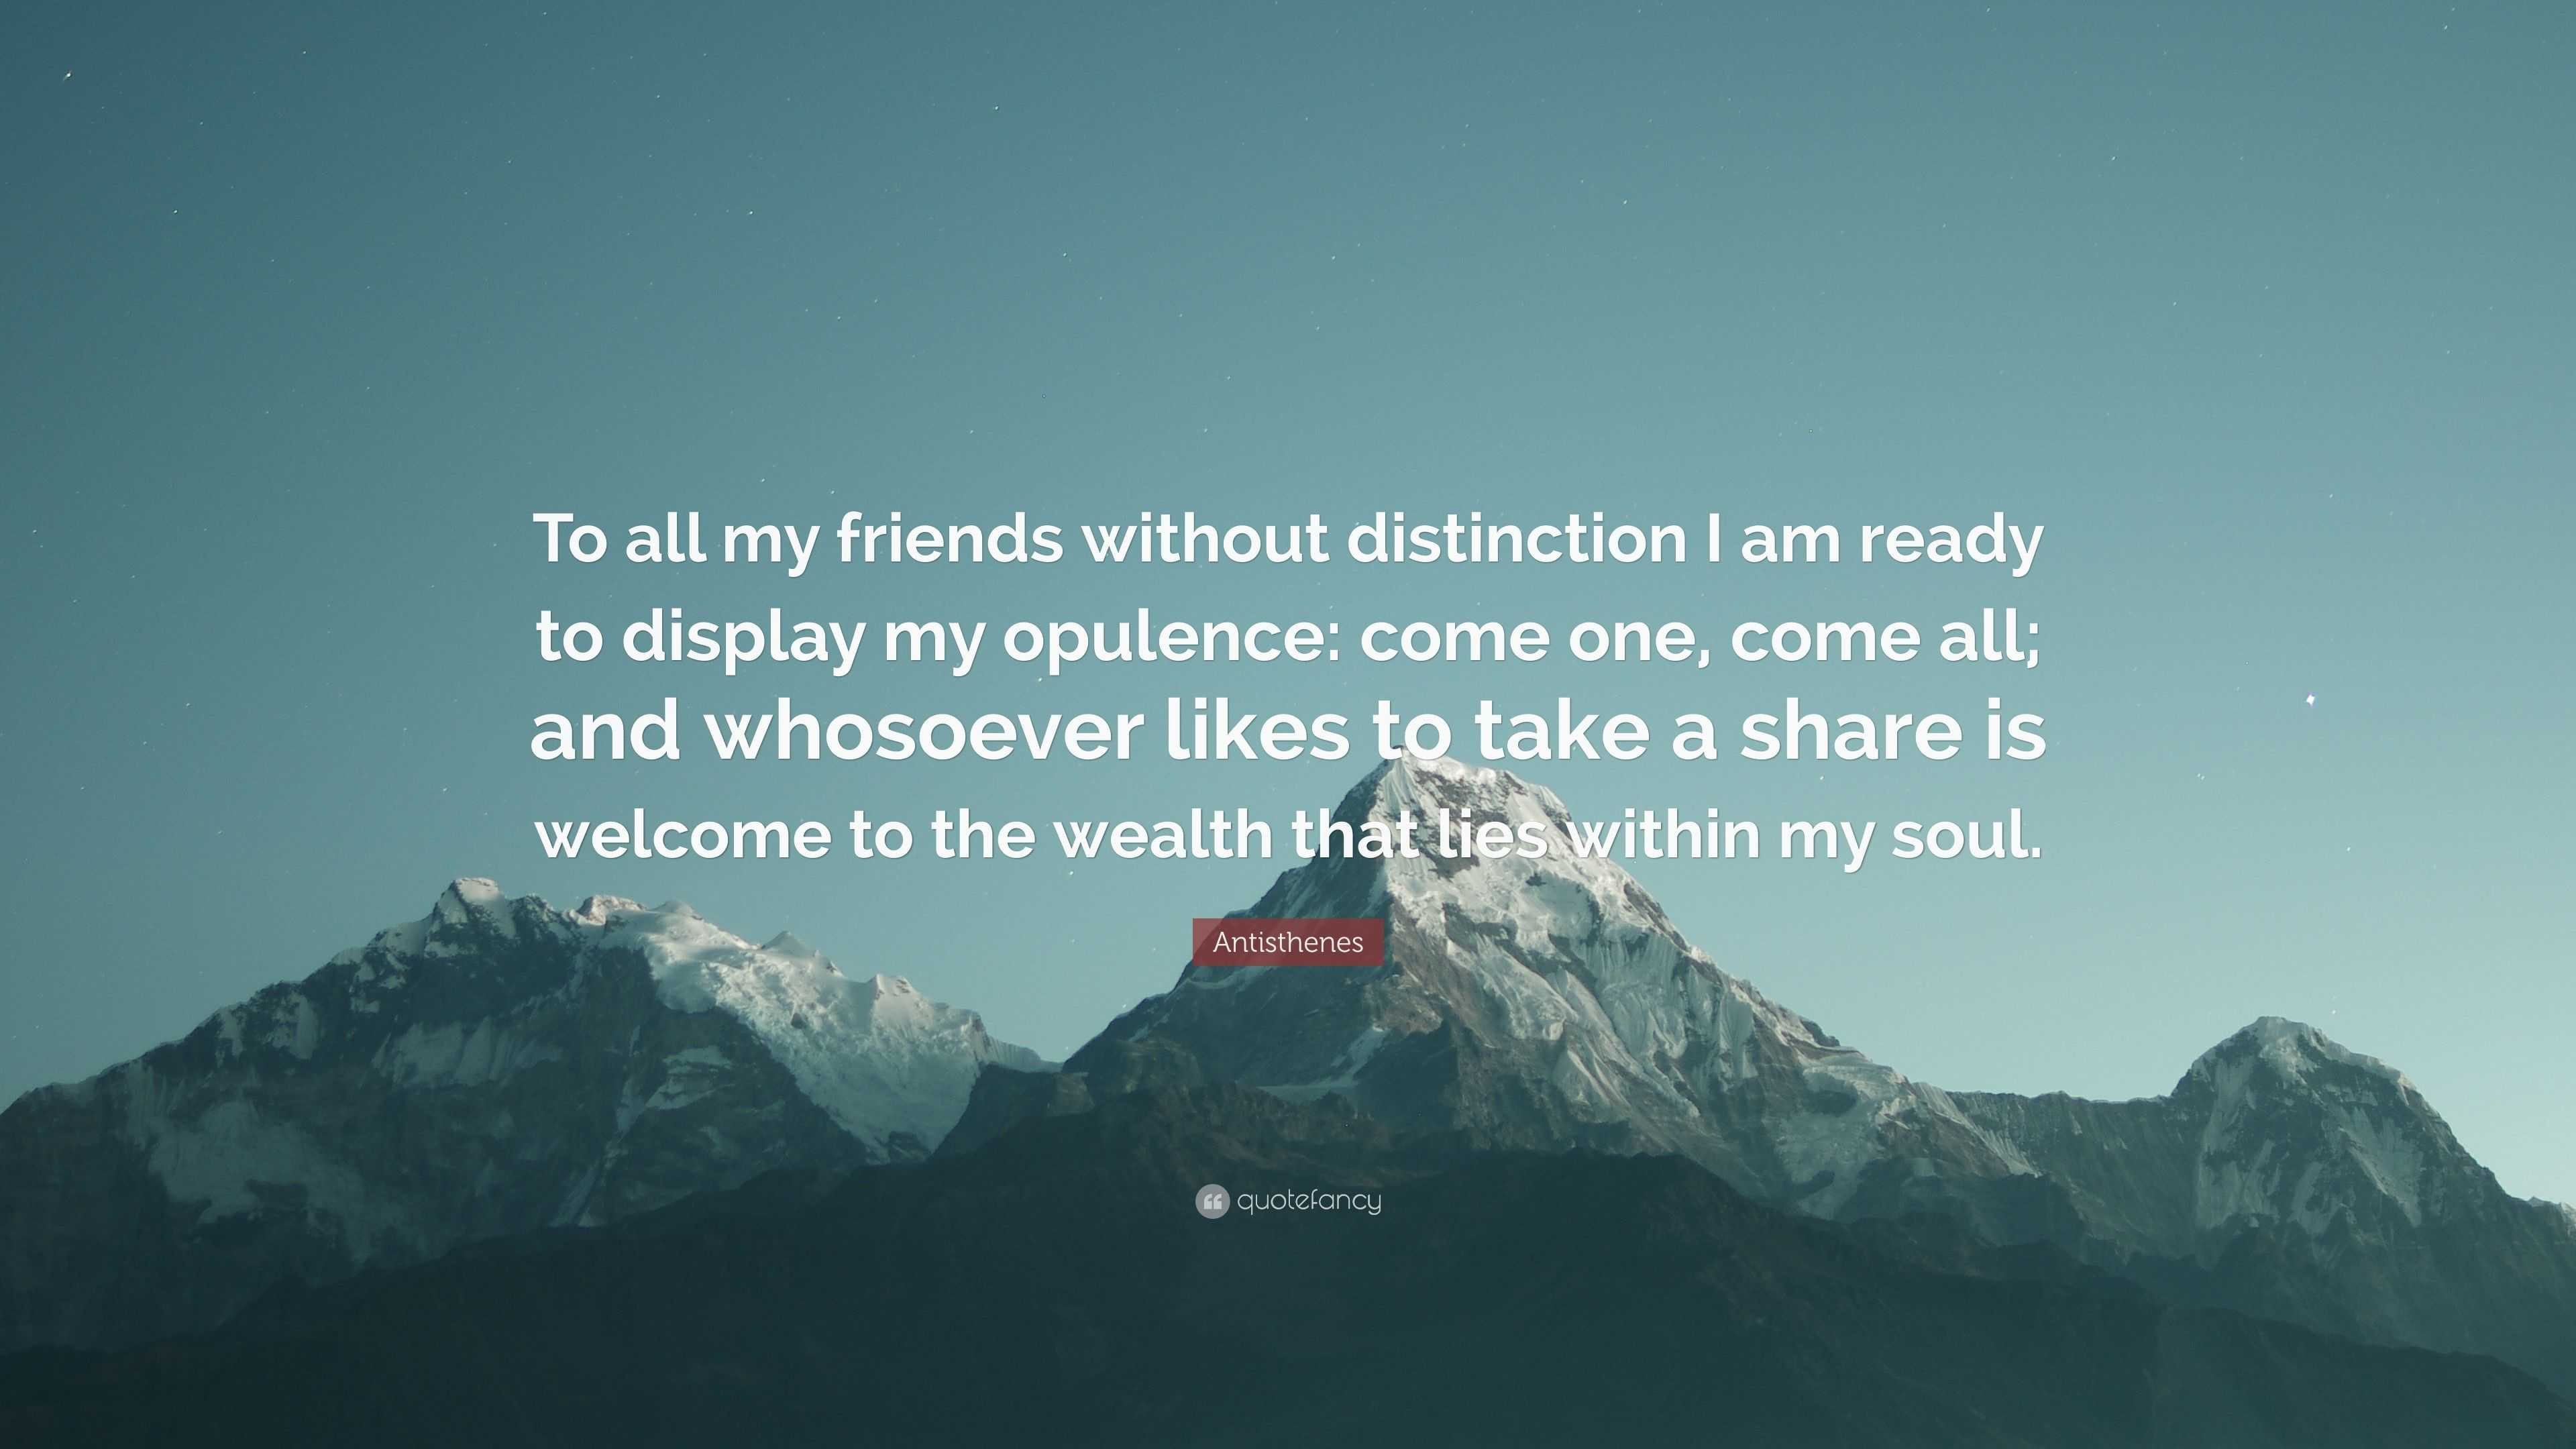 Antisthenes Quote: “To all my friends without distinction I am